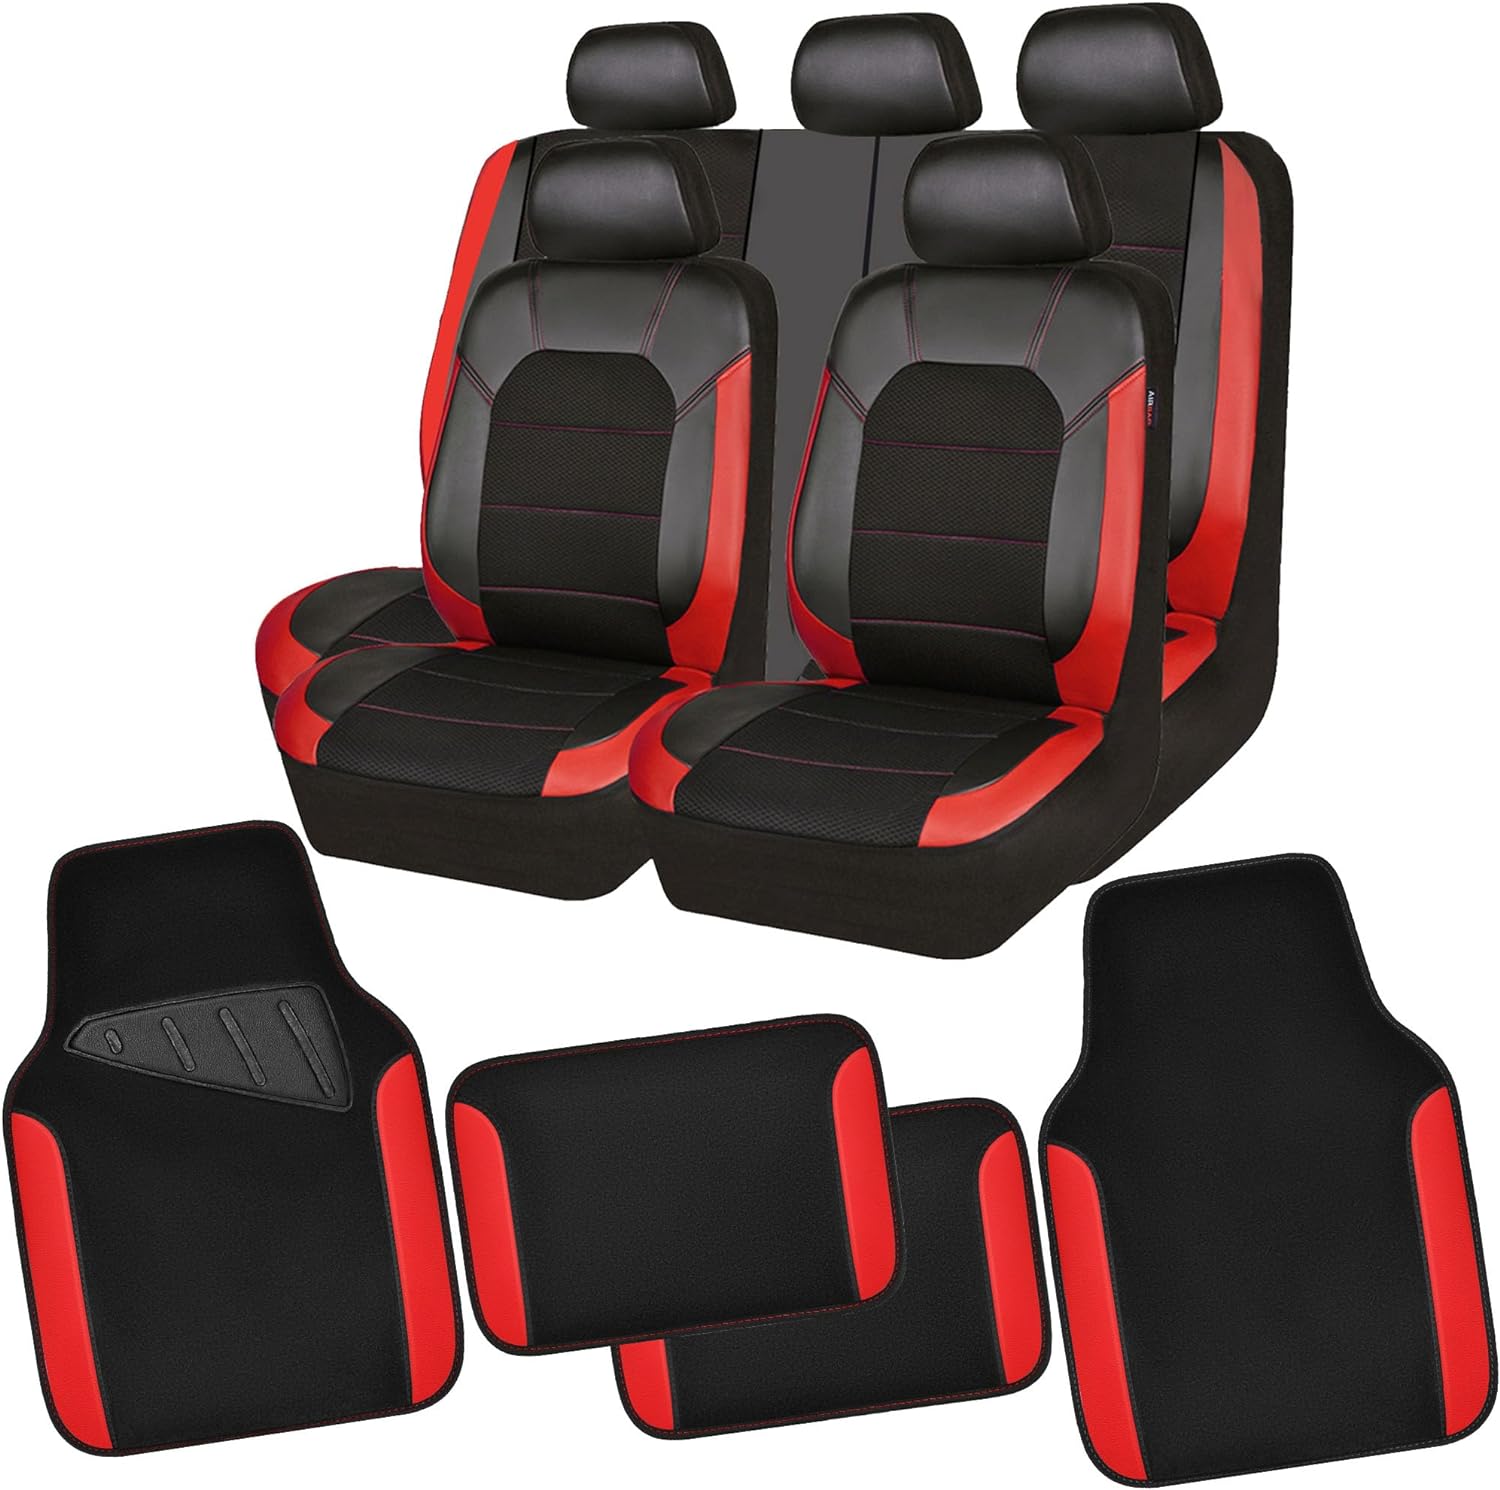 CAR PASS Leather Car Seat Covers, Waterproof Anti-Slip Nibbed Backing Floor Mats for SUV, Vans,Sedans,Trucks, Automotive (Black and Red)